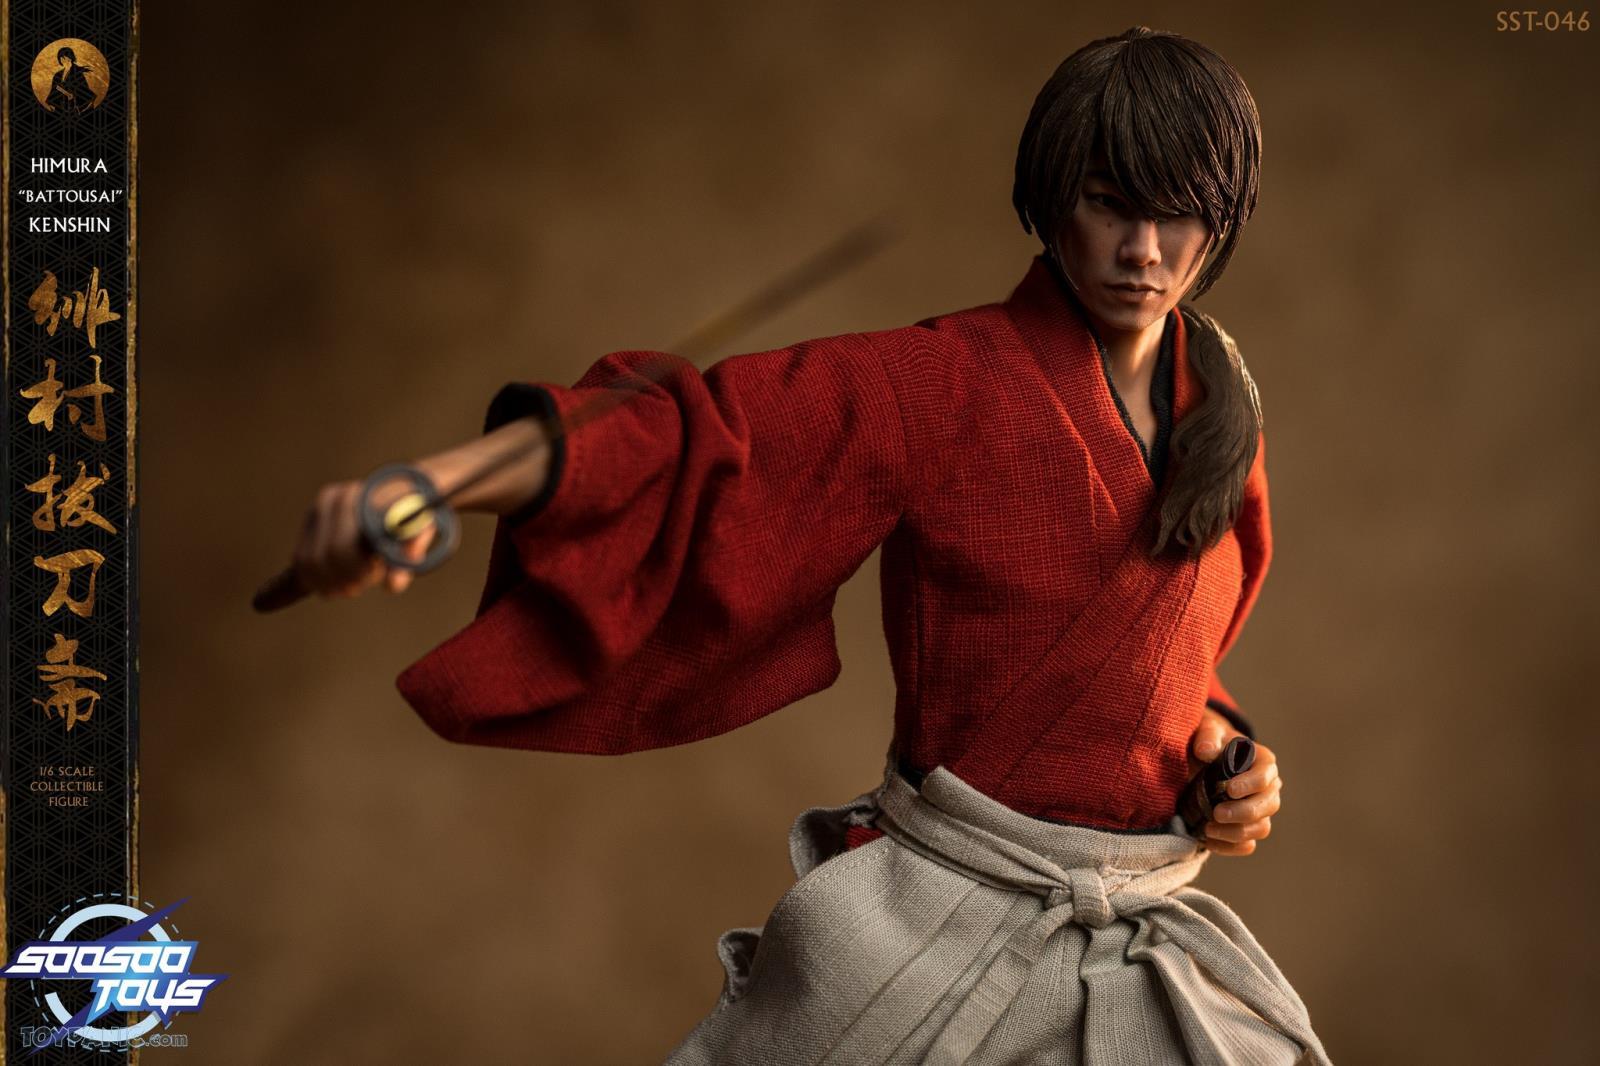 himura - NEW PRODUCT: 1/6 scale Rurouni Kenshin Collectible Figure from SooSooToys 712202251228PM_287534